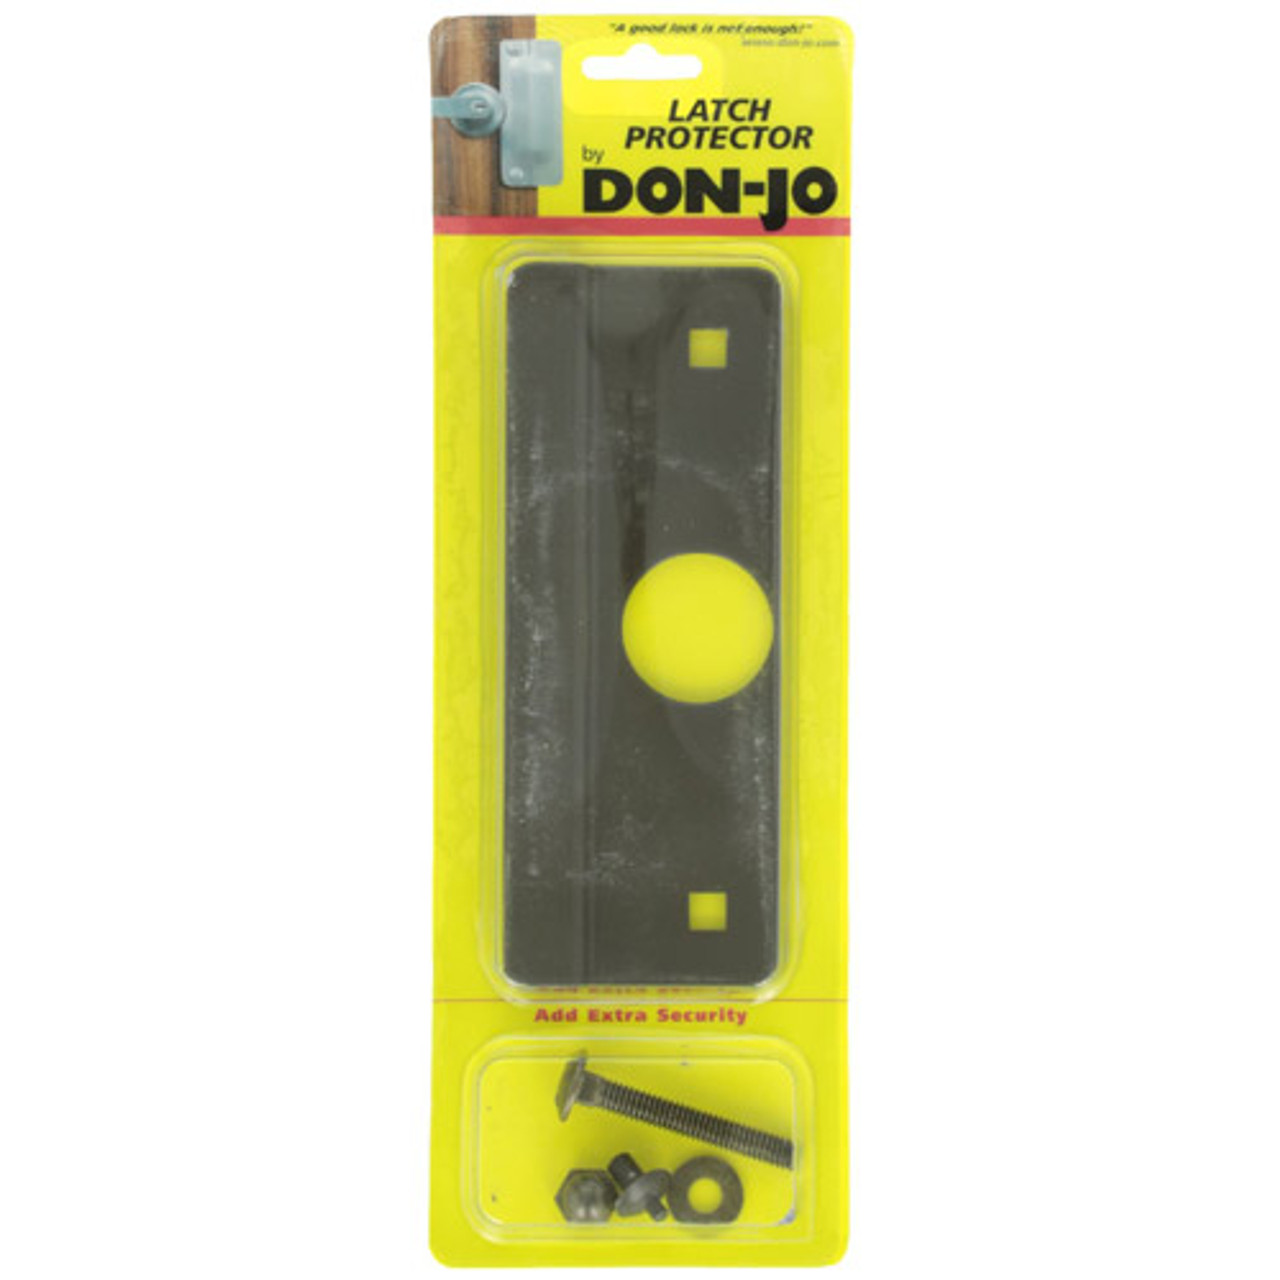 LP-307-DU Don Jo Latch Protector in Duro Coated Finish